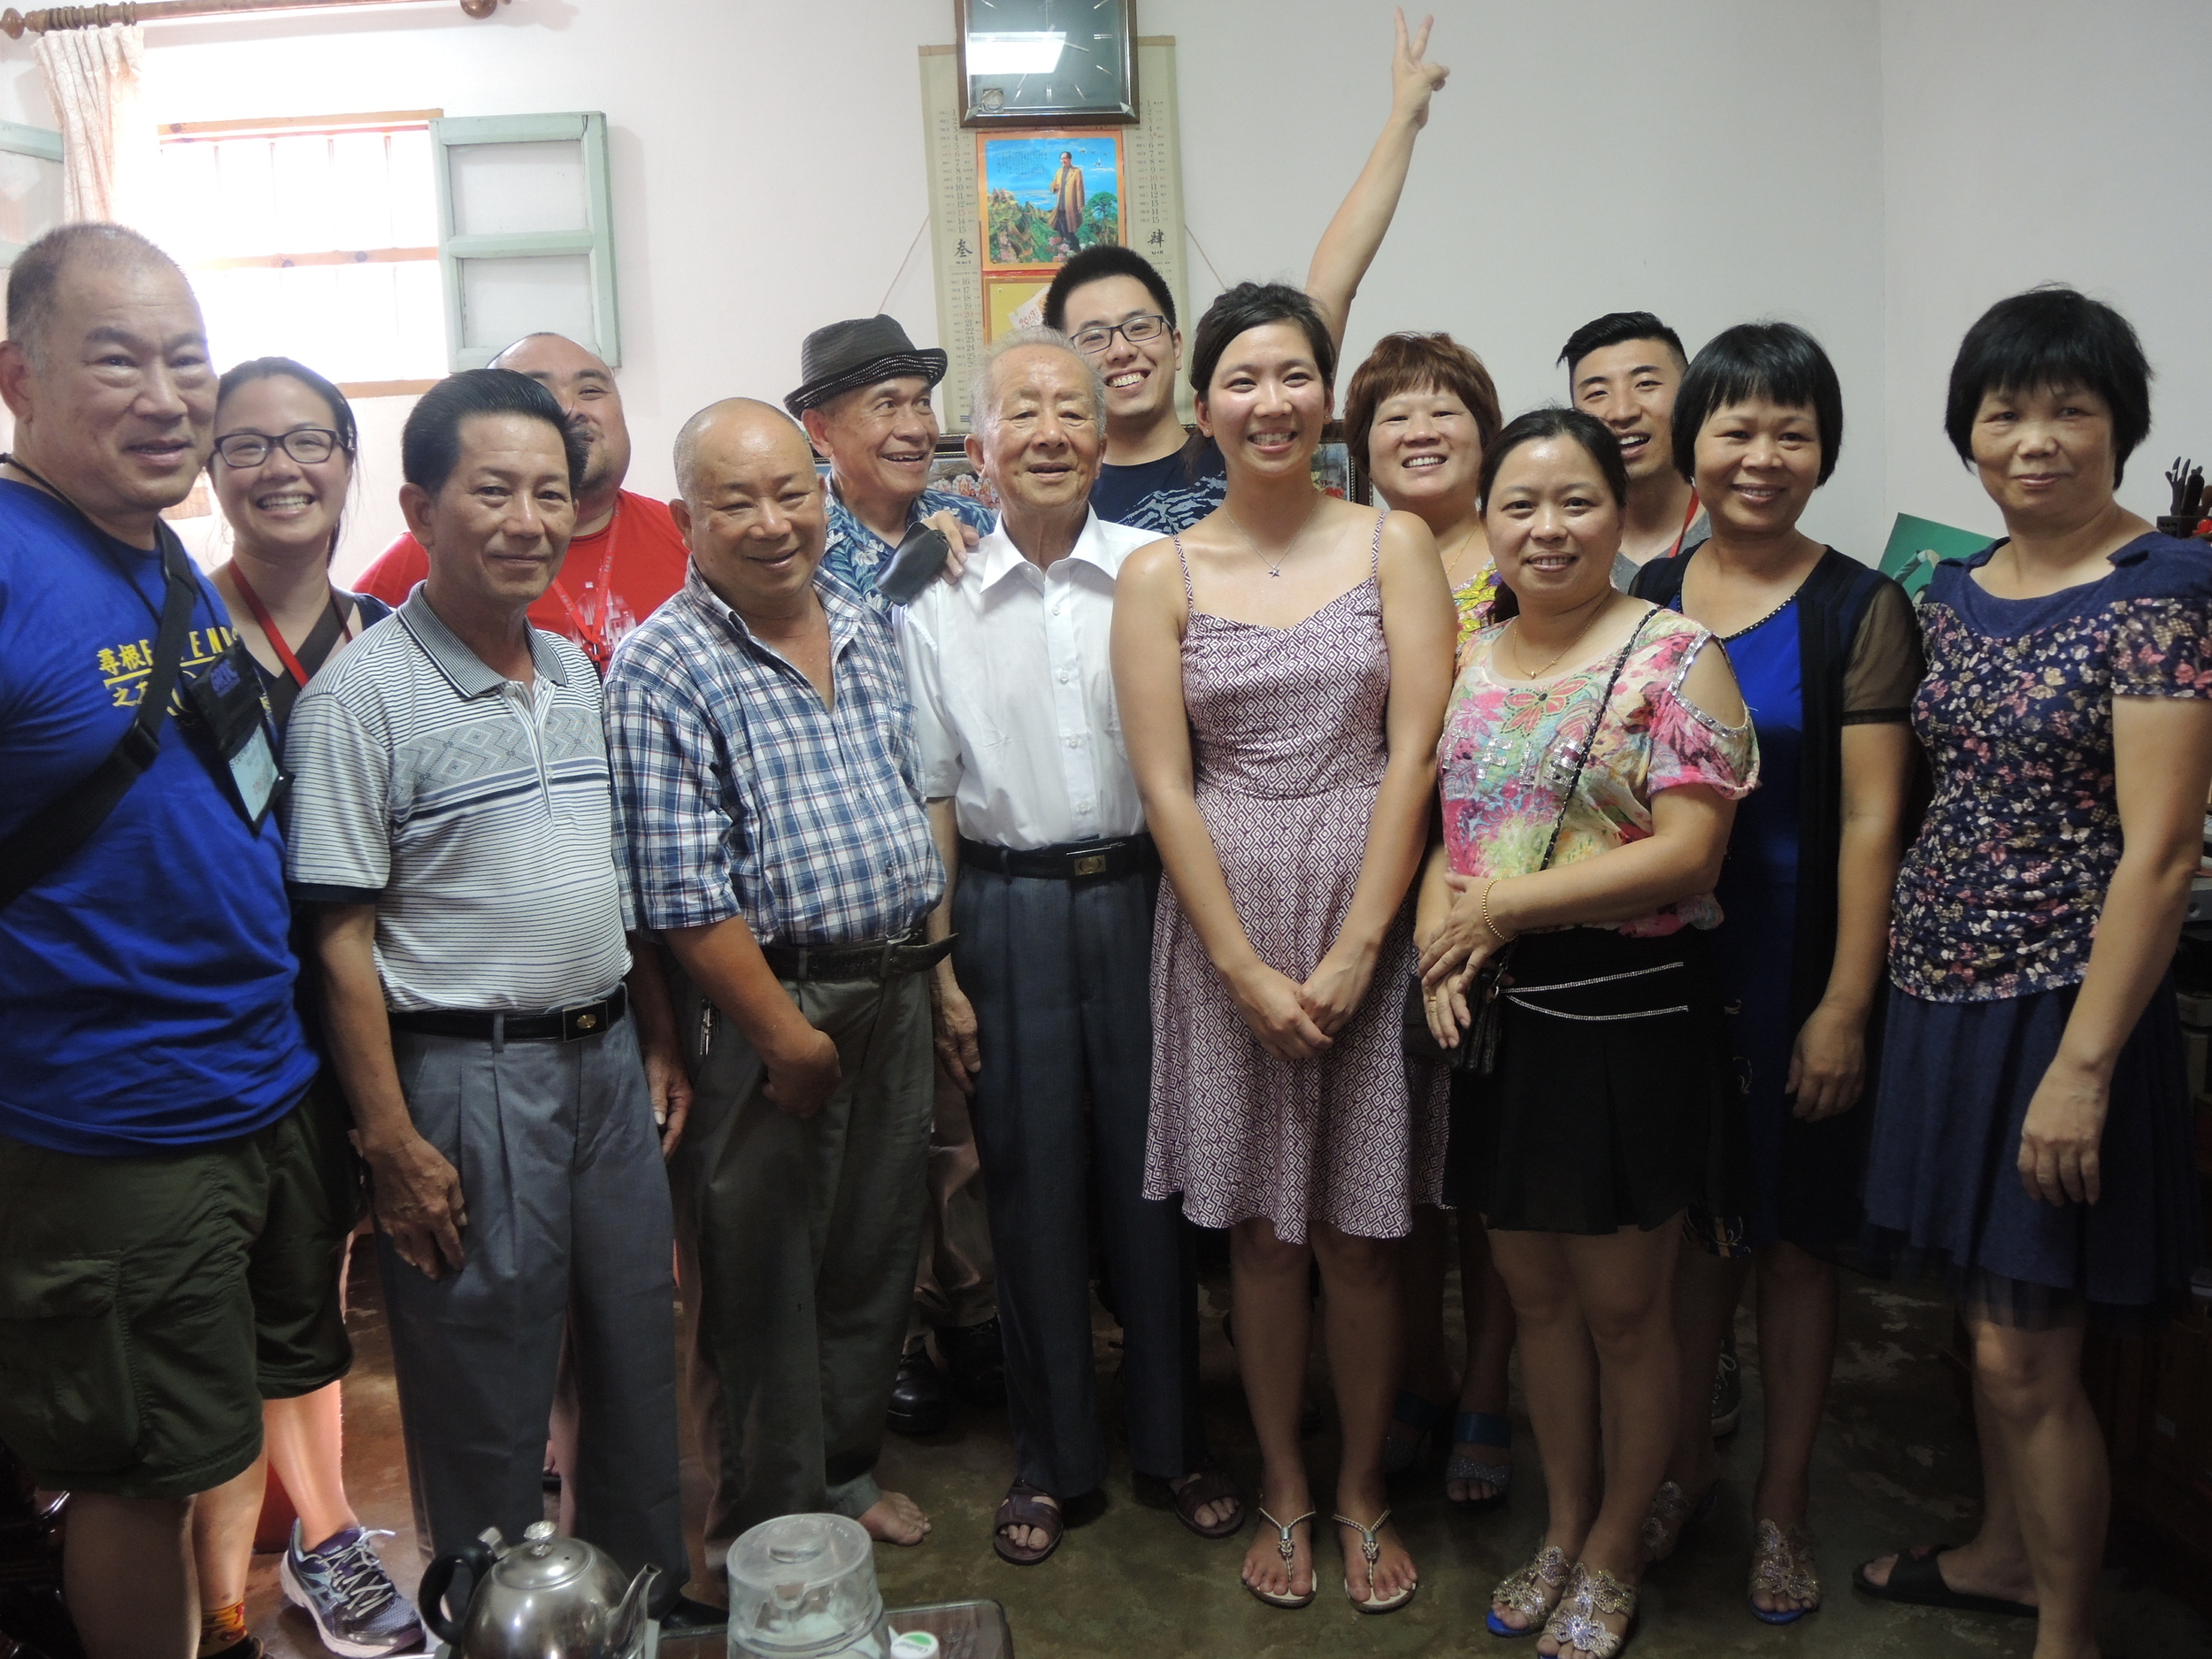 Family group photo with leaders inside third granduncle's home after some kung fu cha